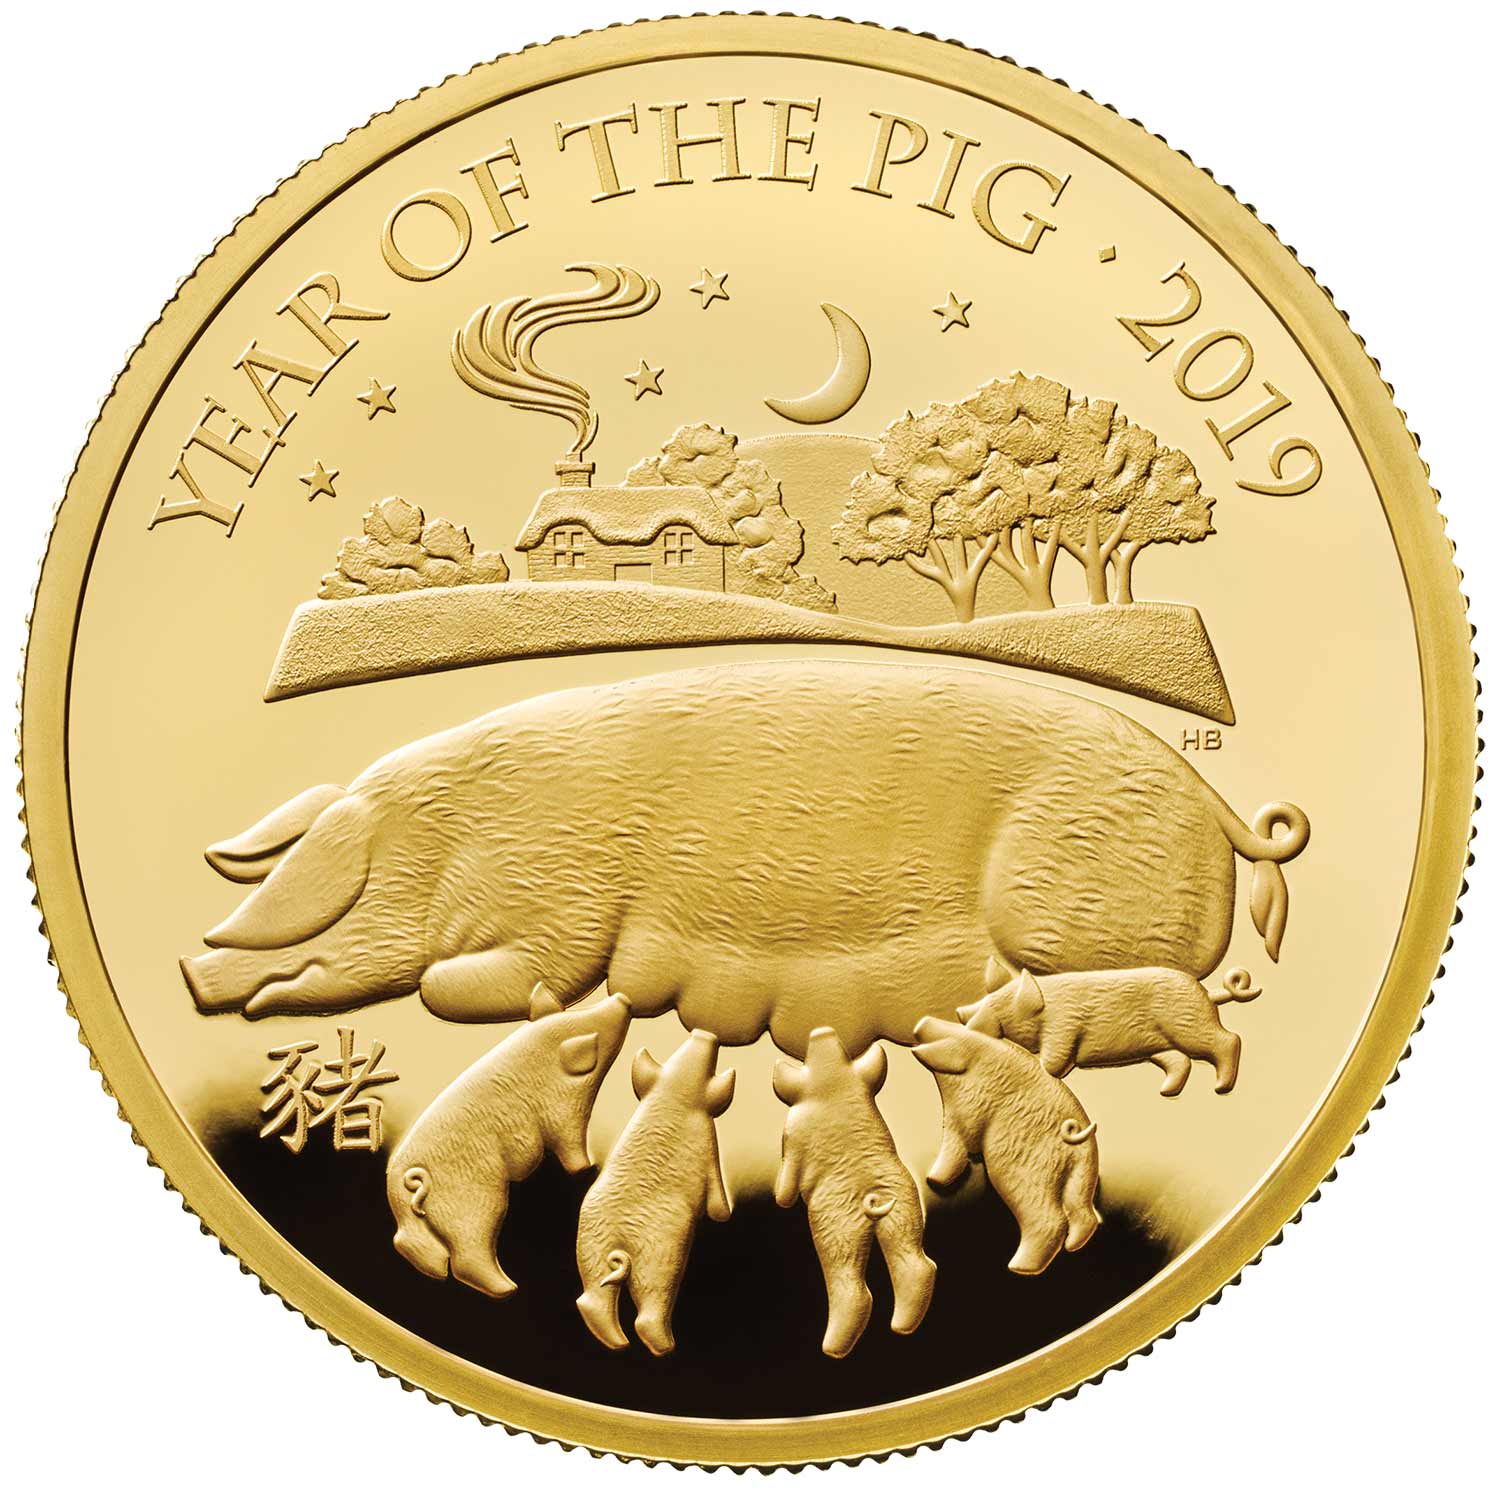 The year of the pig silver Chinese zodiac 2019 anniversary coins souvenir,, 